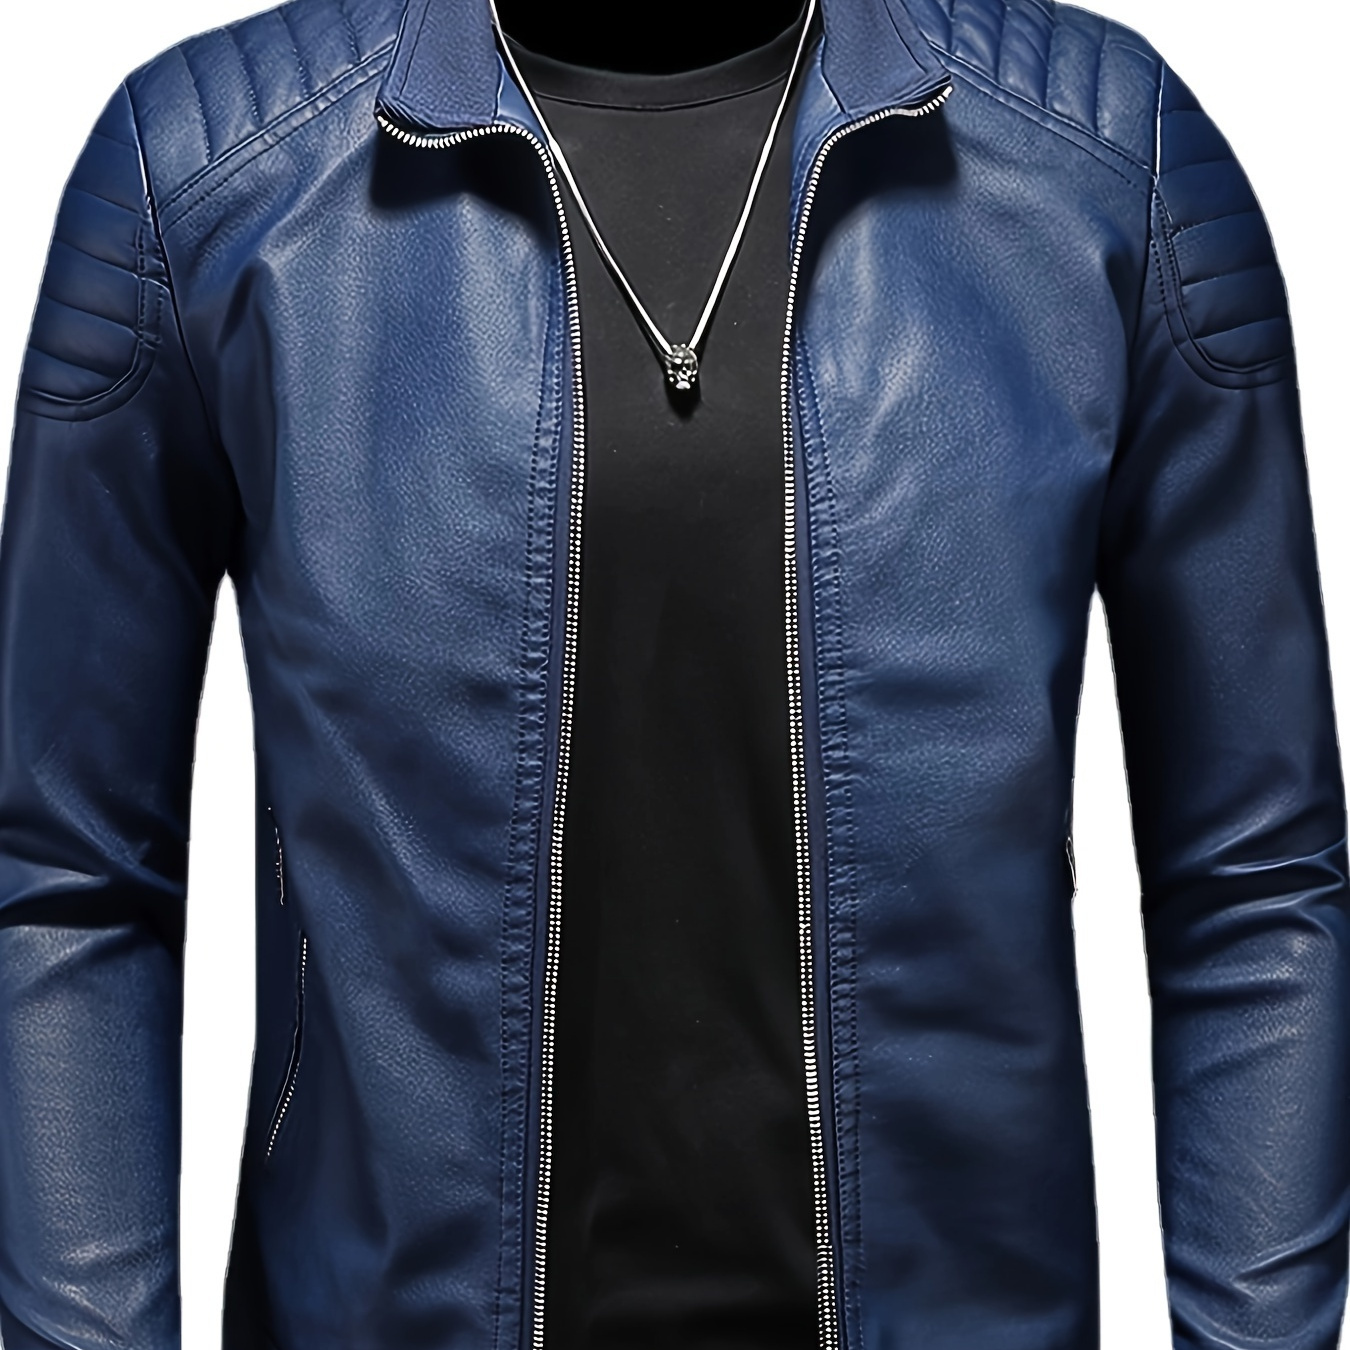 

Men's Solid Pu Leather Jacket With Zipper Pockets, Casual Stand Collar Zip Up Long Sleeve Outwear For Outdoor